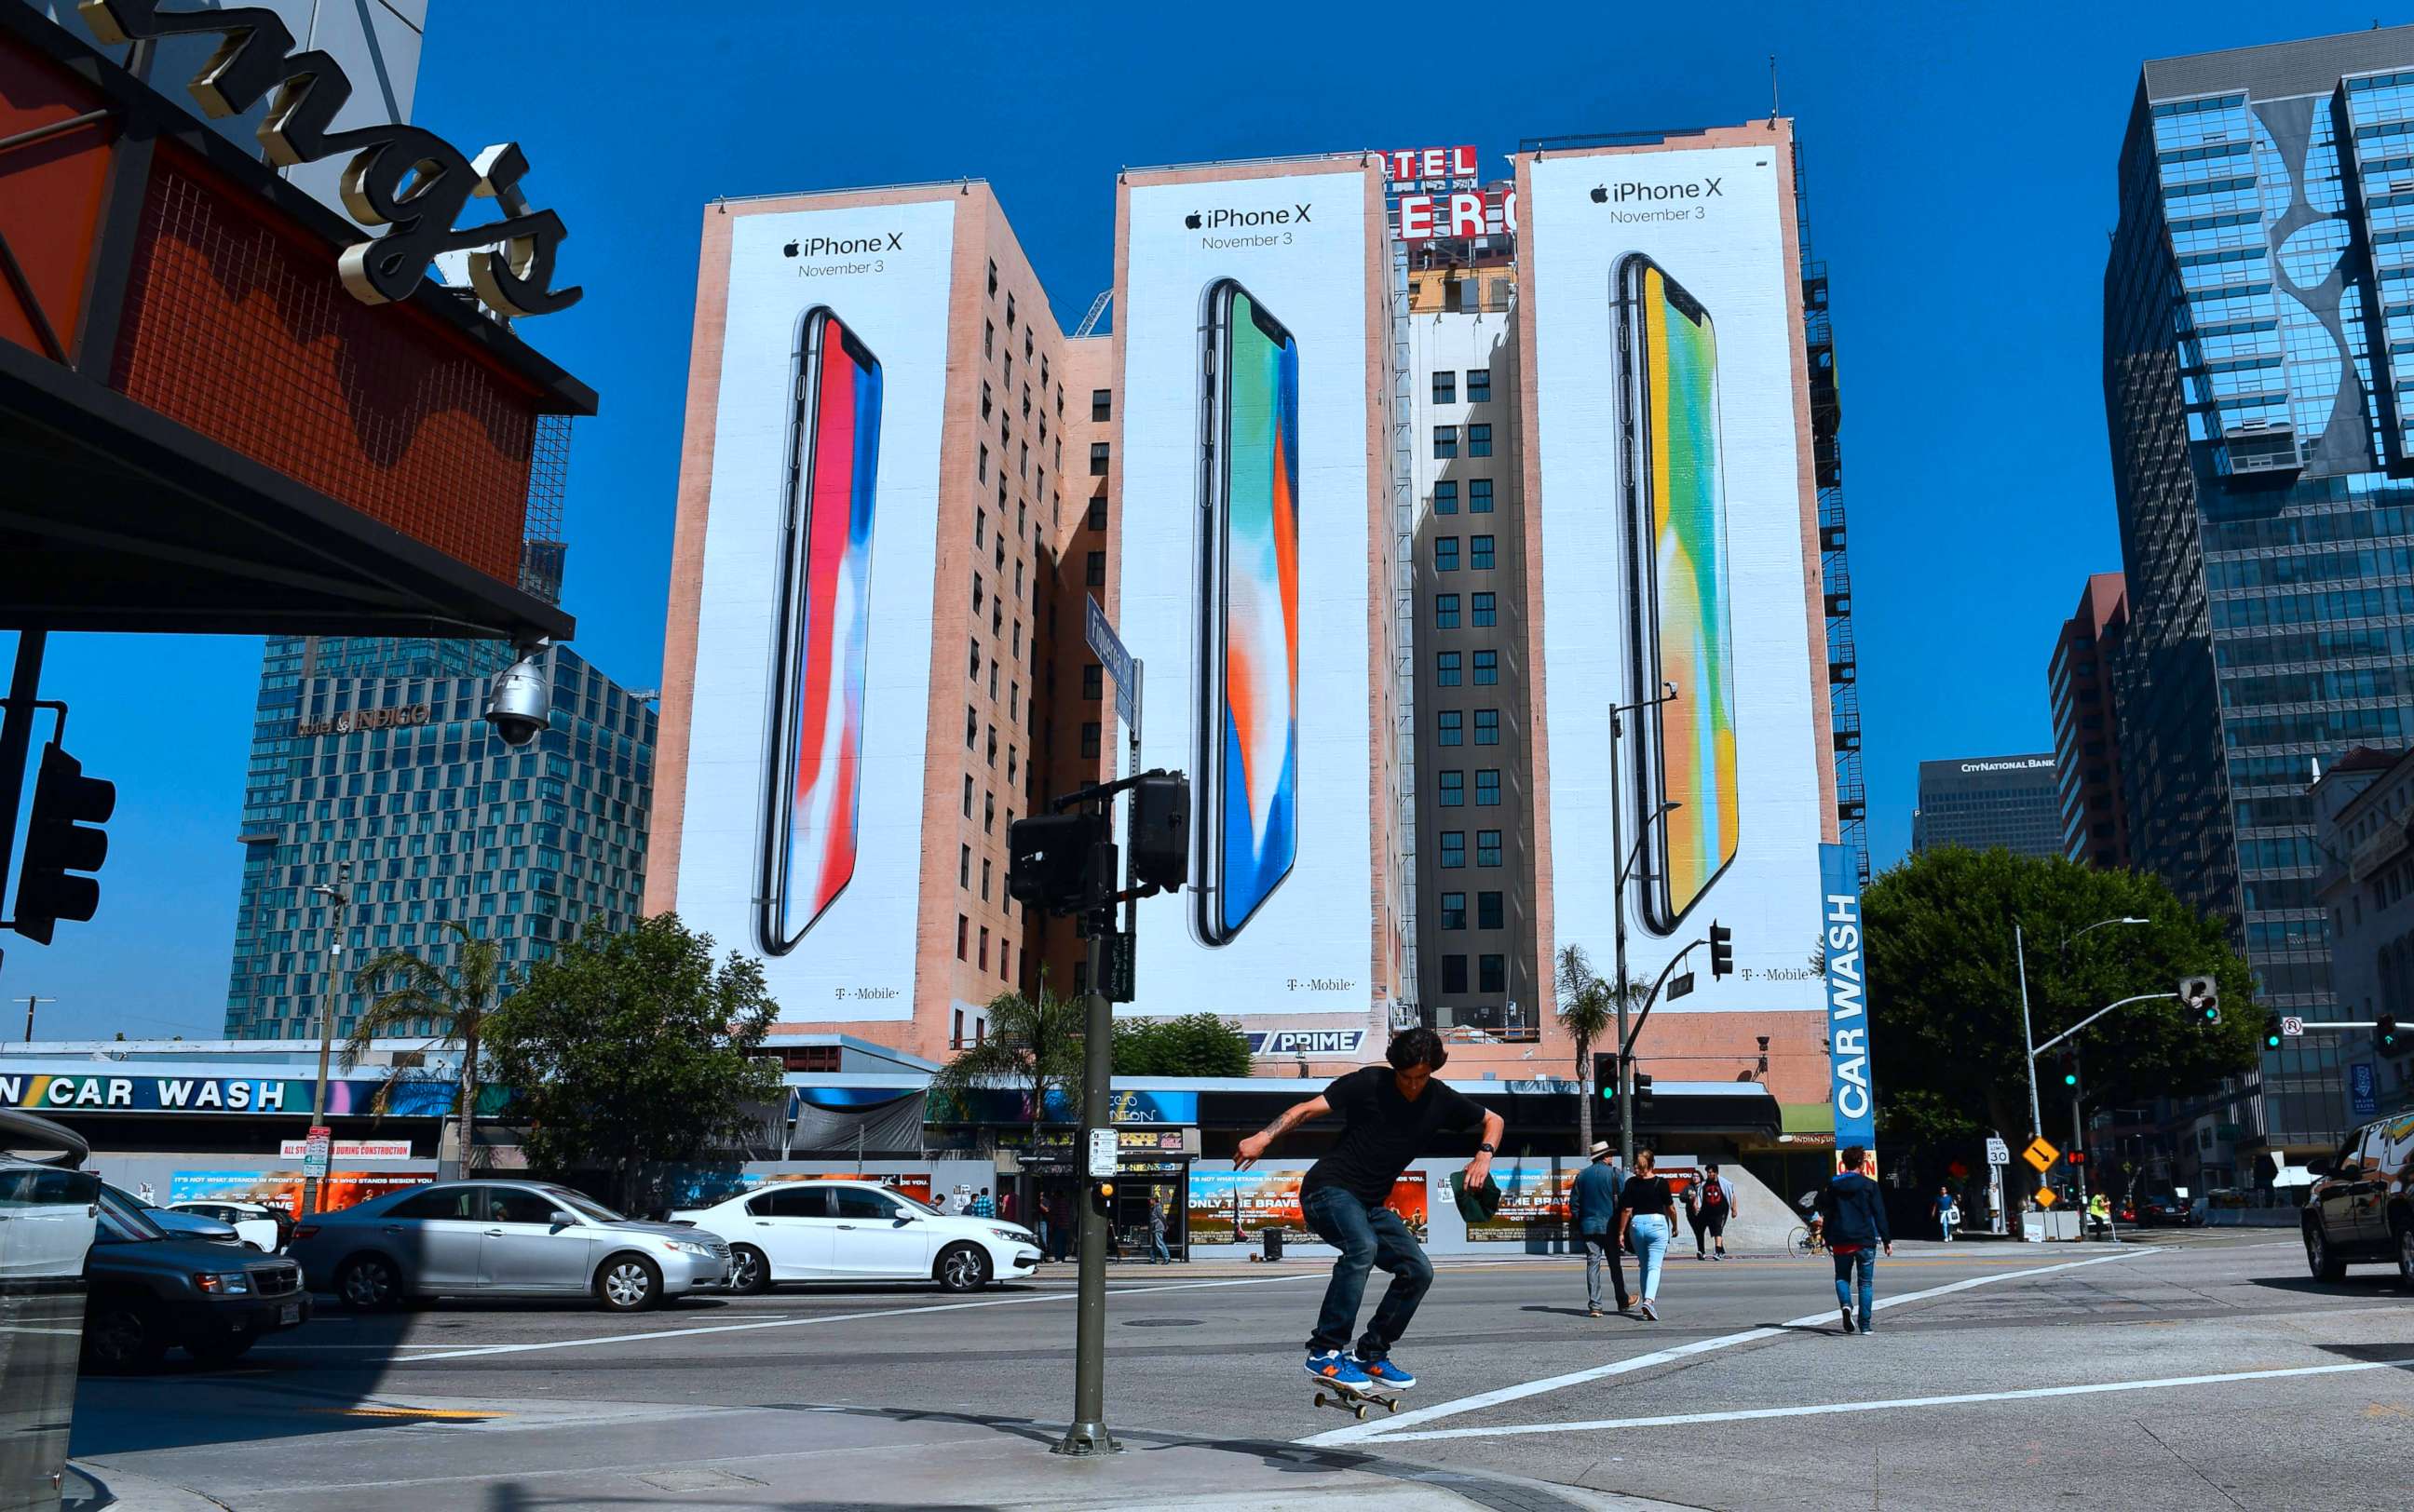 PHOTO: A skateboarder jumps the curb crossing a street in Los Angeles on Oct. 13, 2017, where advertising for Apple's new iPhone X, due for release on November 3, covers the sides of three buildings.